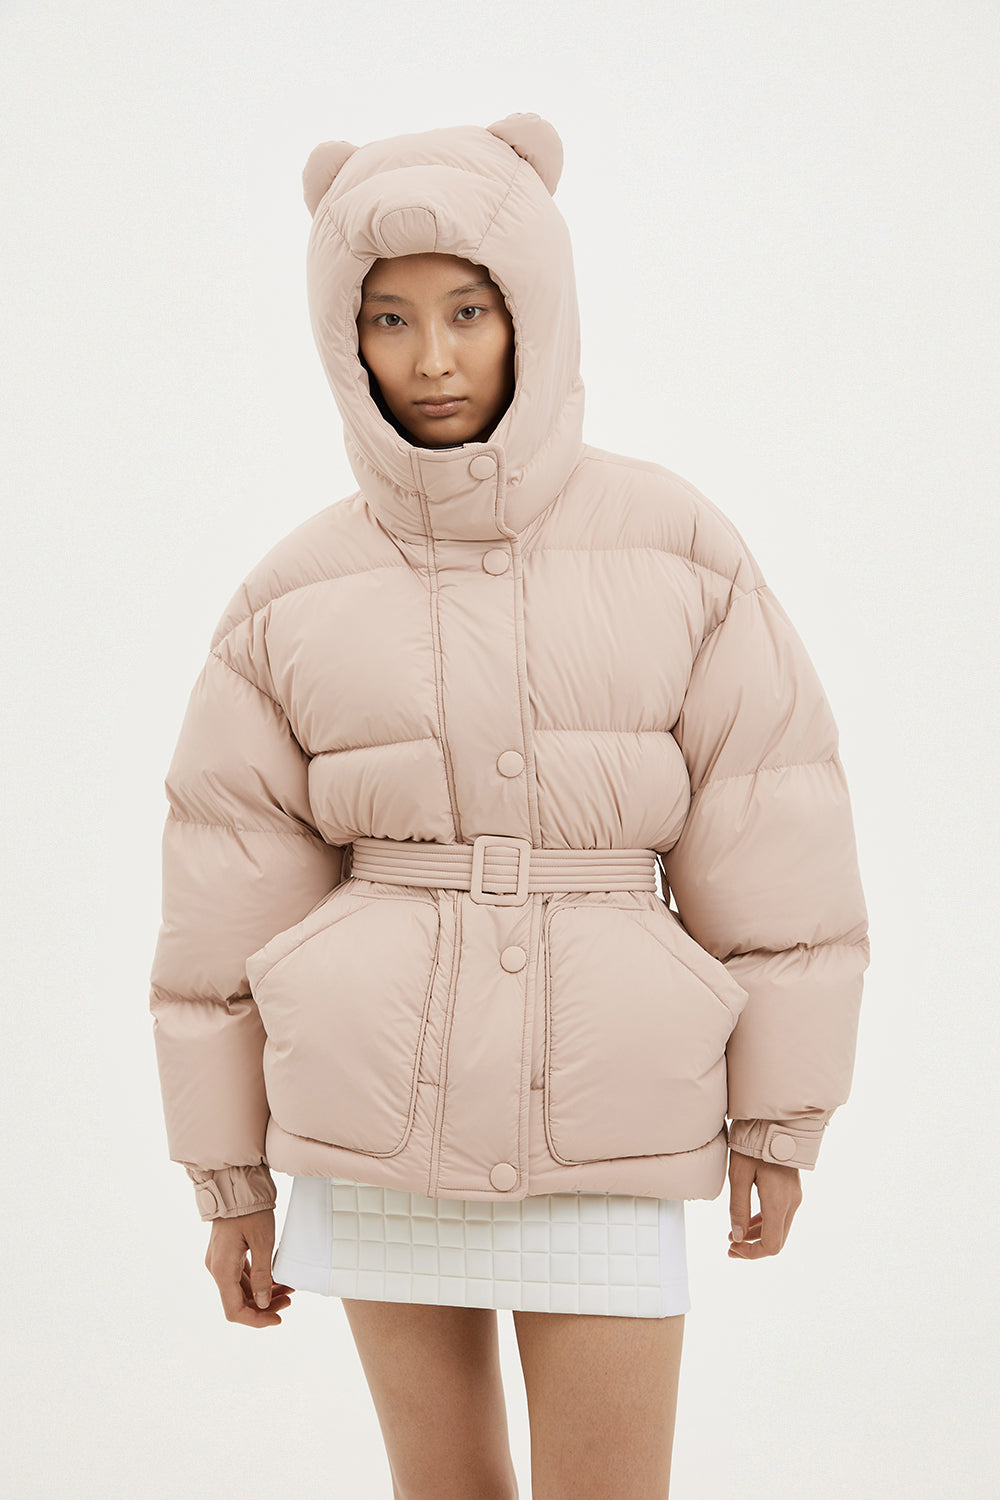 Bear white goose down pale pink puffer jacket for winter 